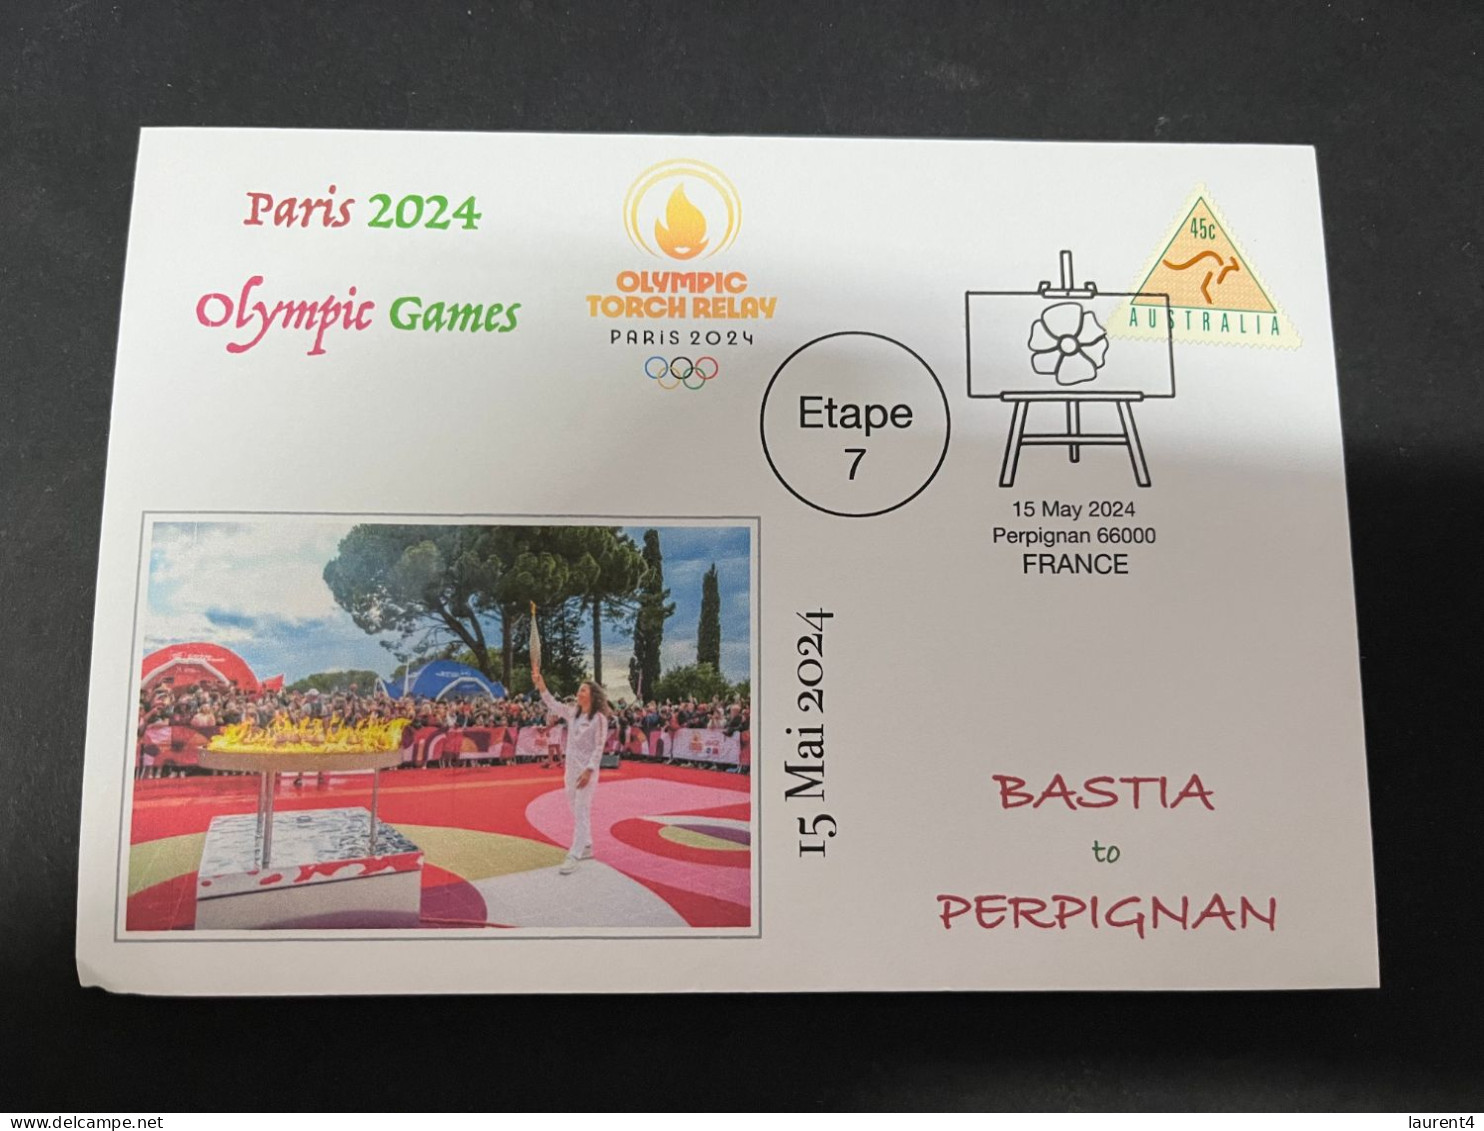 16-5-2024 (5 Z 17) Paris Olympic Games 2024 - Torch Relay (Etape 7) In Perpignan (15-5-2024) With Triangle Stamp - Summer 2024: Paris